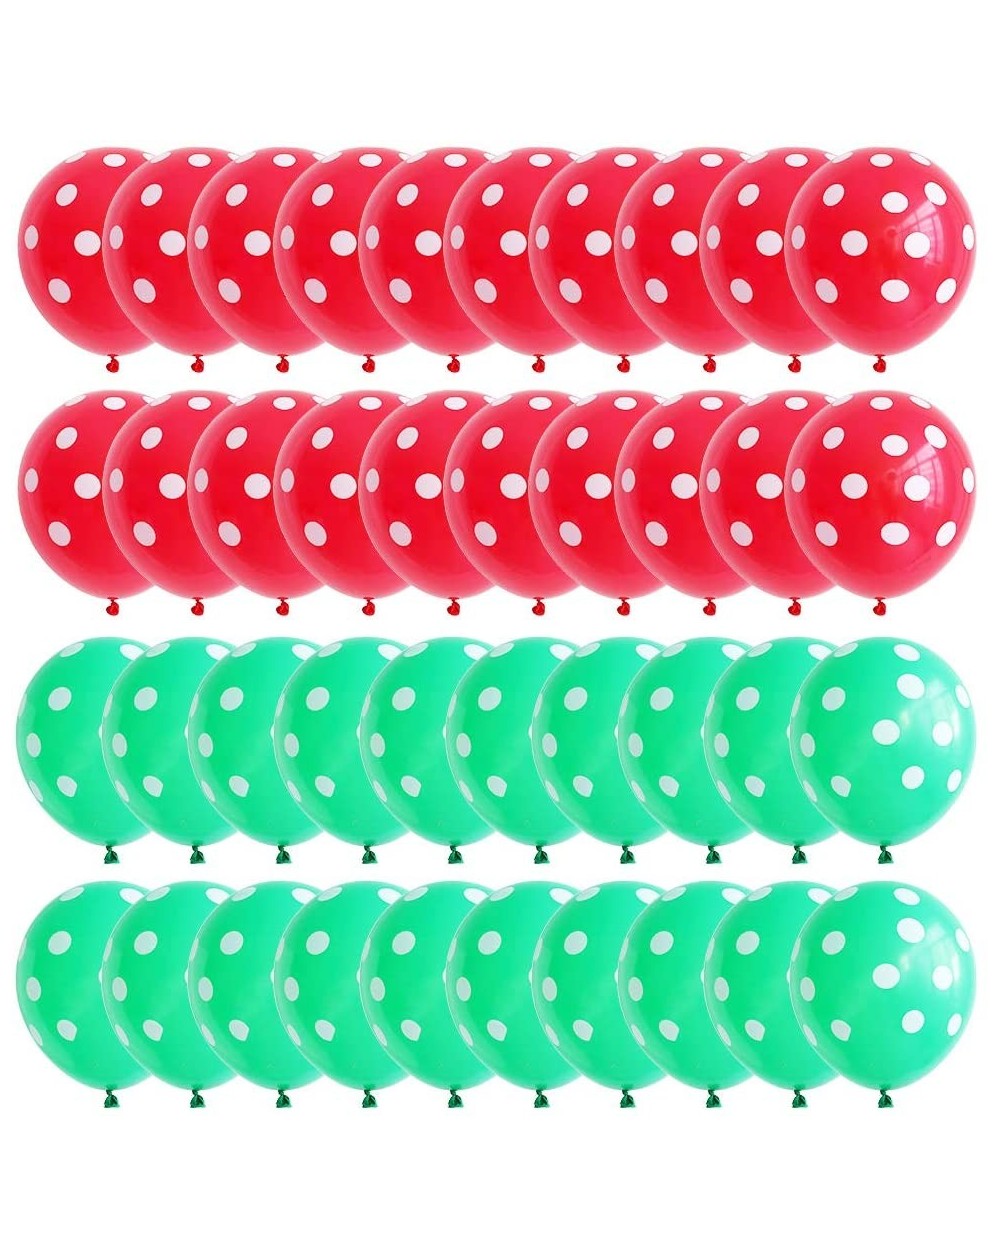 Balloons 100pcs Red Green Dot Balloons 12inch Perfect for Kids Birthday Party Christmas Party Decor - CW18KSGUR2X $9.96